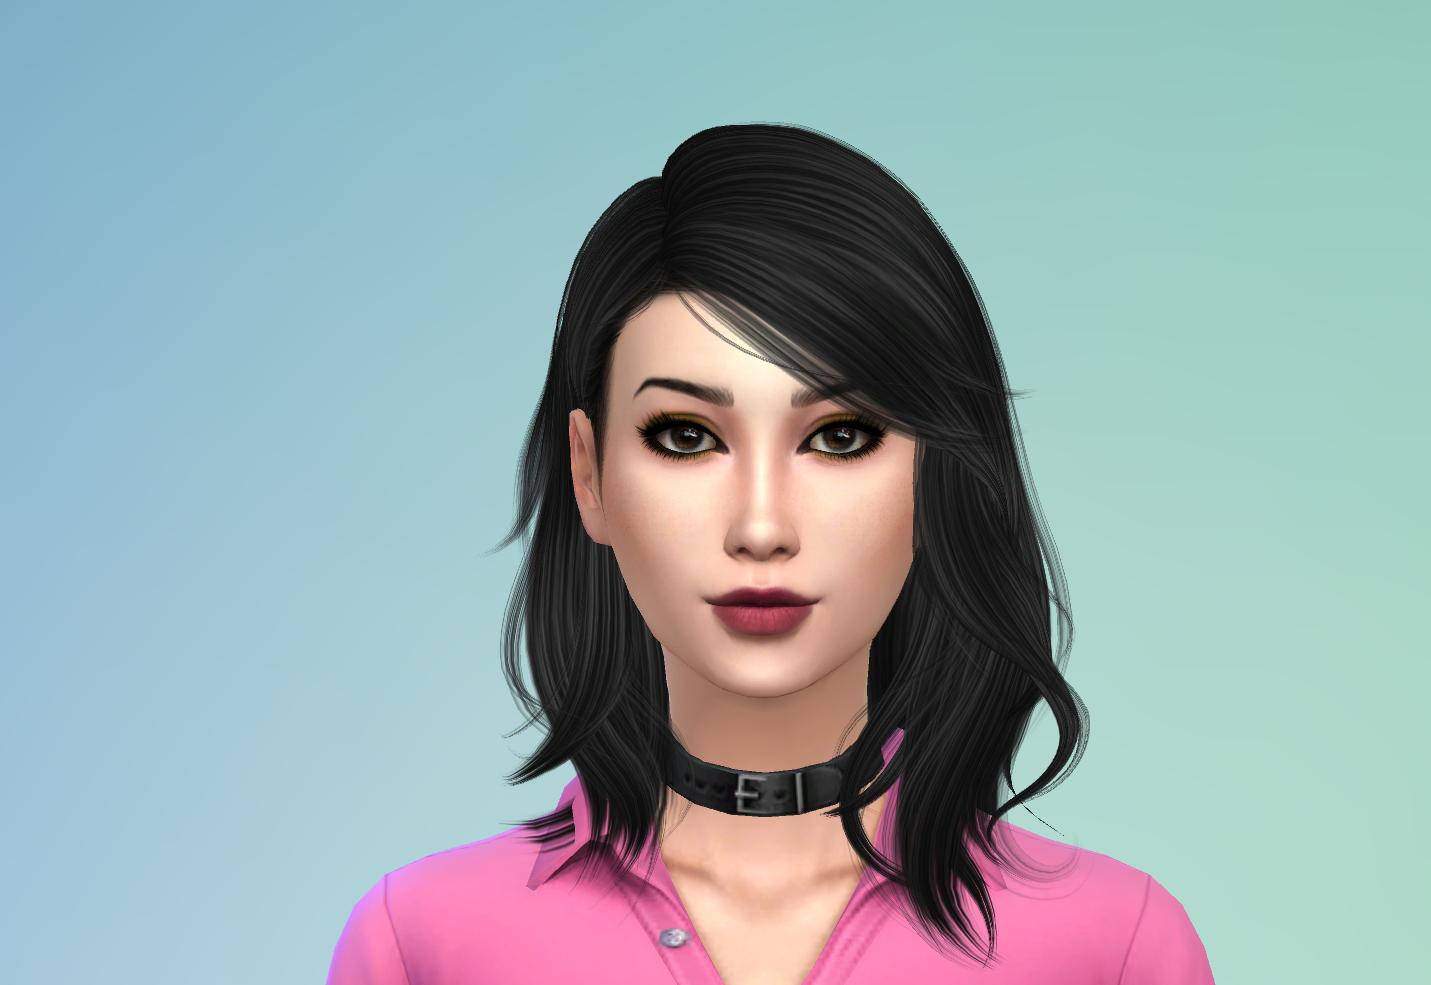 My Custom Sims - Downloads - The Sims 4 - LoversLab